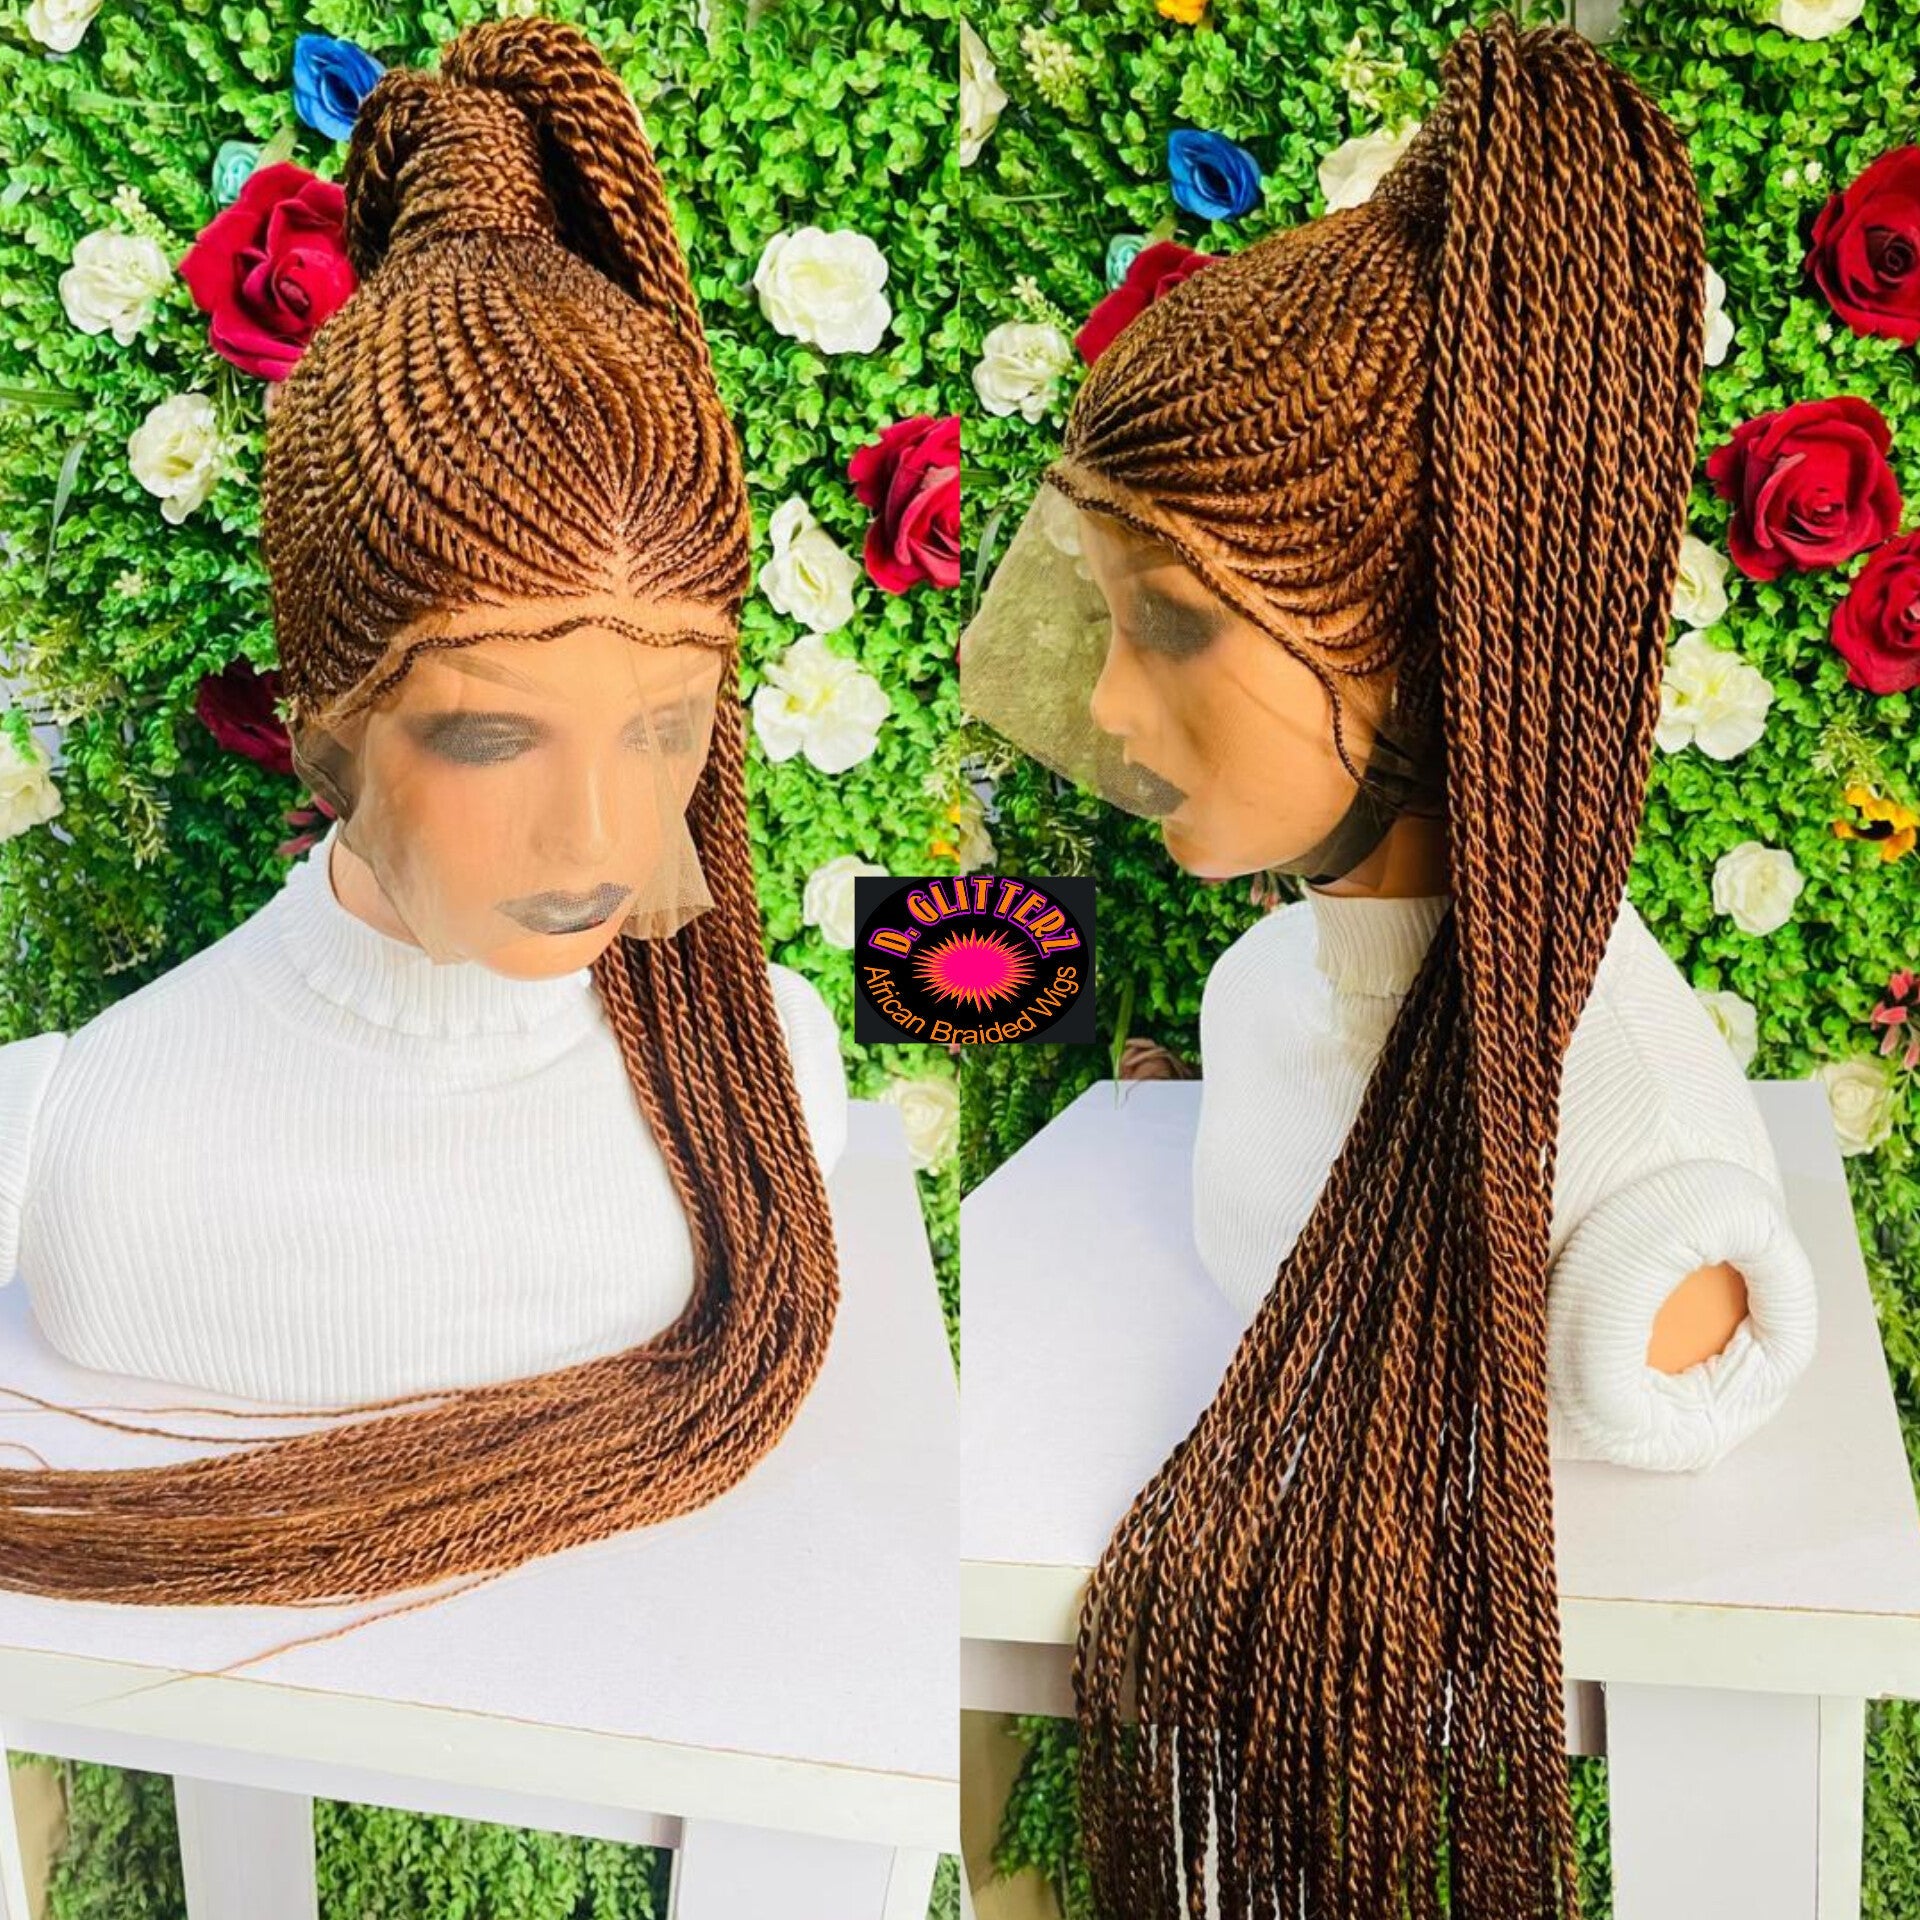 PONYTAIL BASKET CONROW WIGS ON 360 LACE CLOSURE - d.glitterzwigs